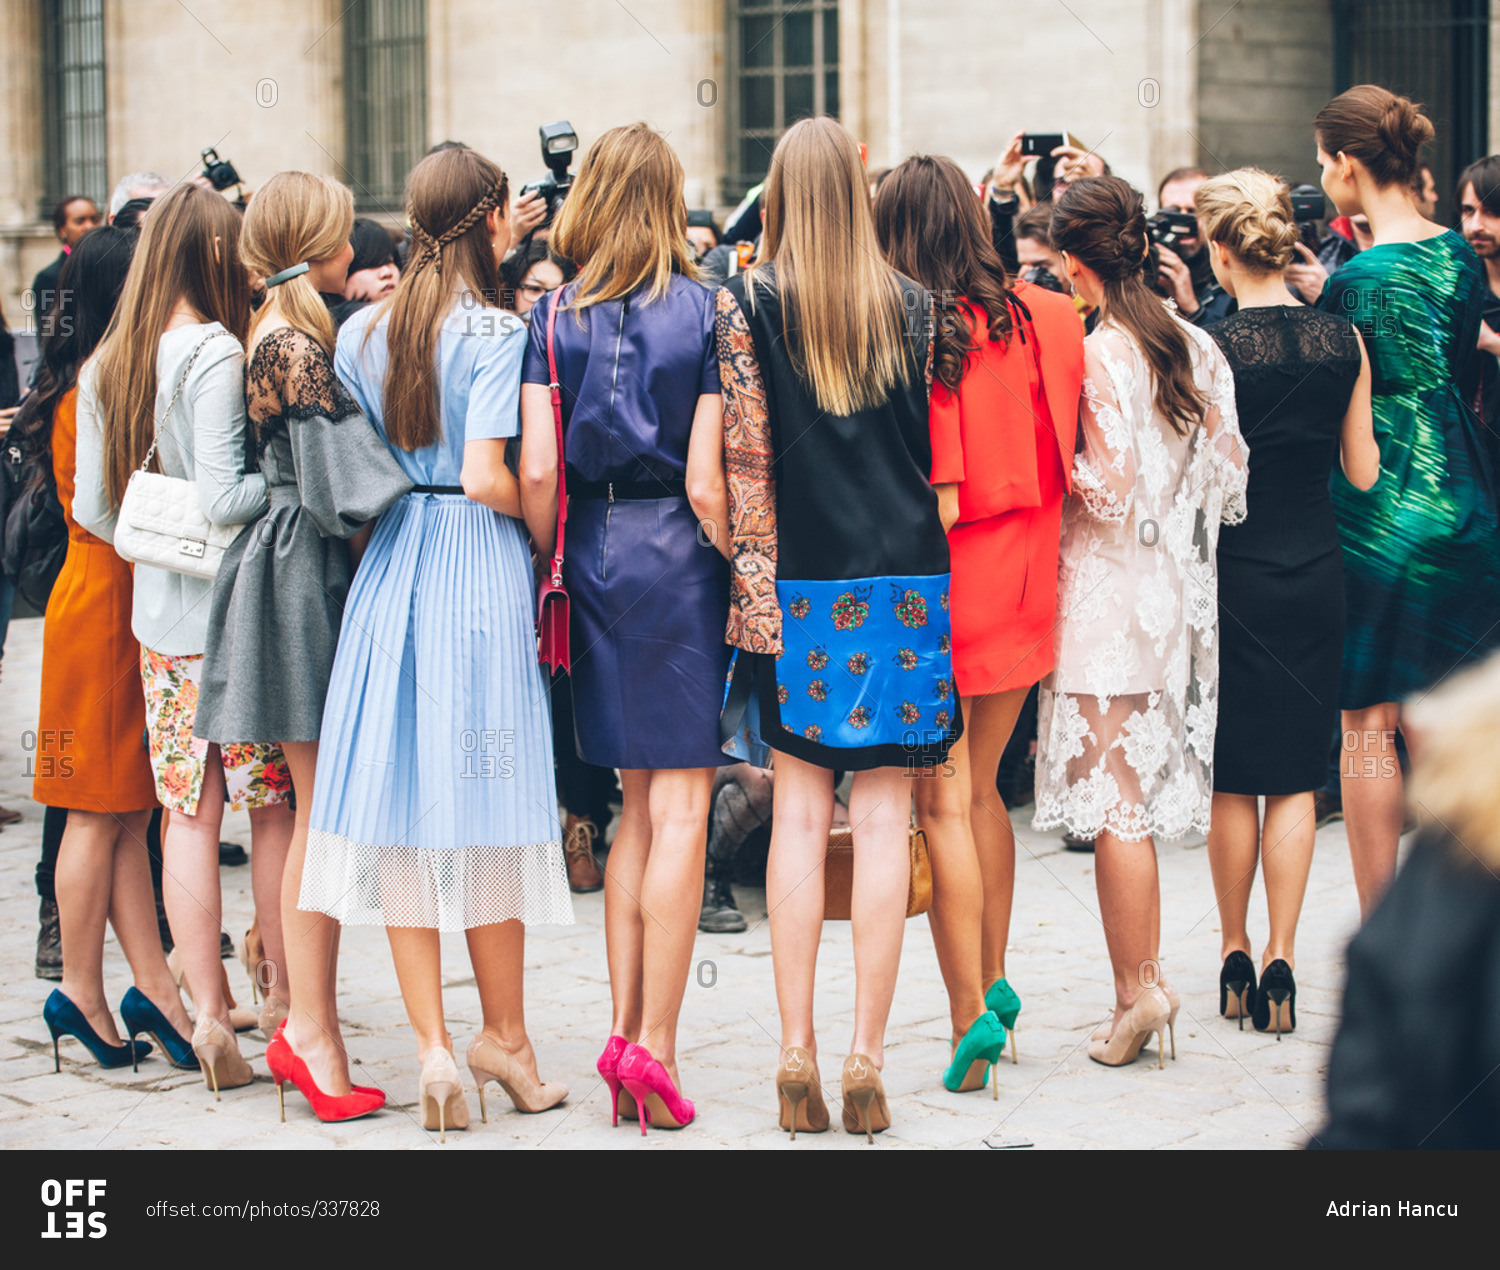 Models on high heels posing to photographers stock photo - OFFSET